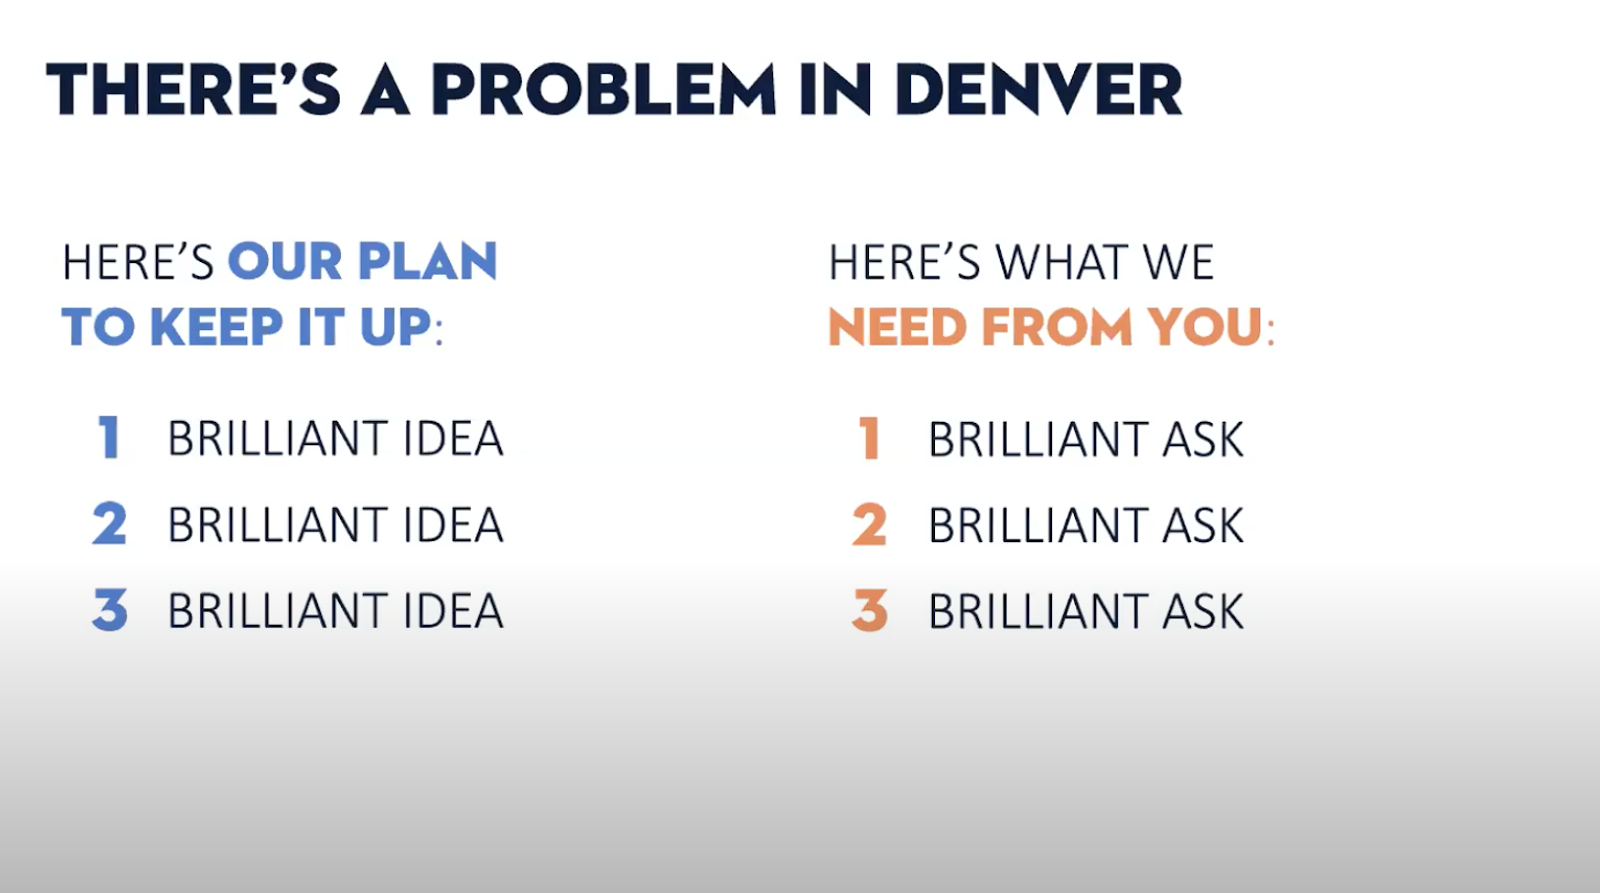 A summary of why there's a problem in Denver, featuring three points under "What we plan to do" and three points under "Here's what we need from you"